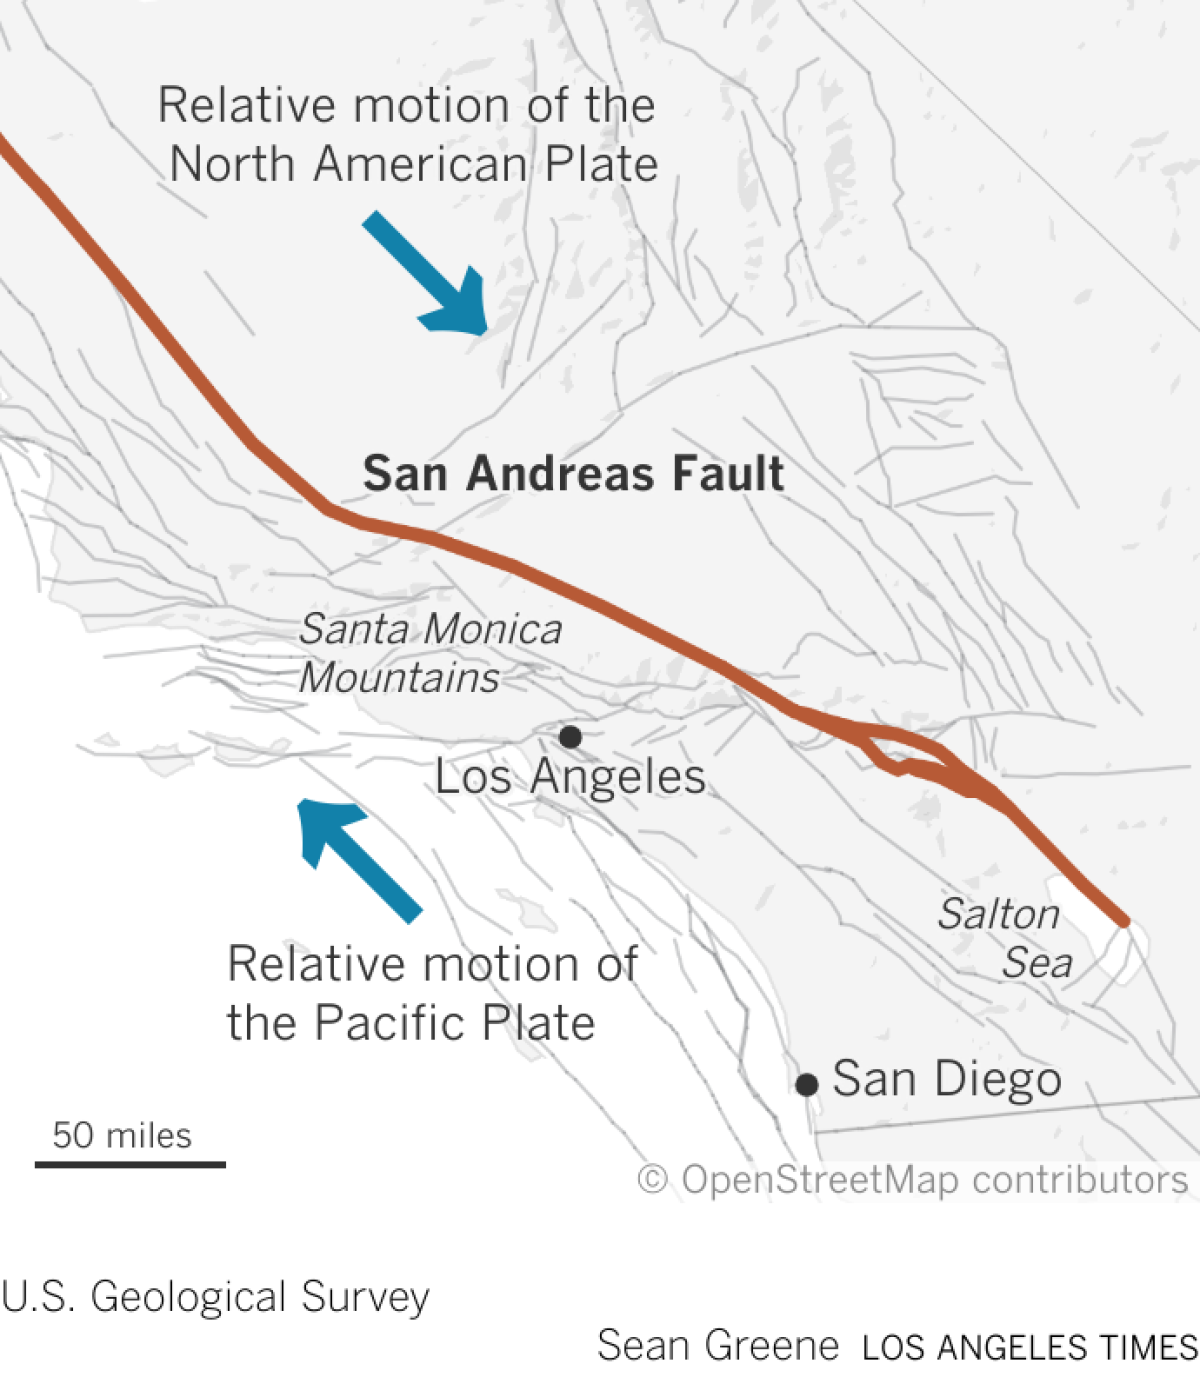 Map shows the path of the San Andreas Fault running through Southern California to the Salton Sea